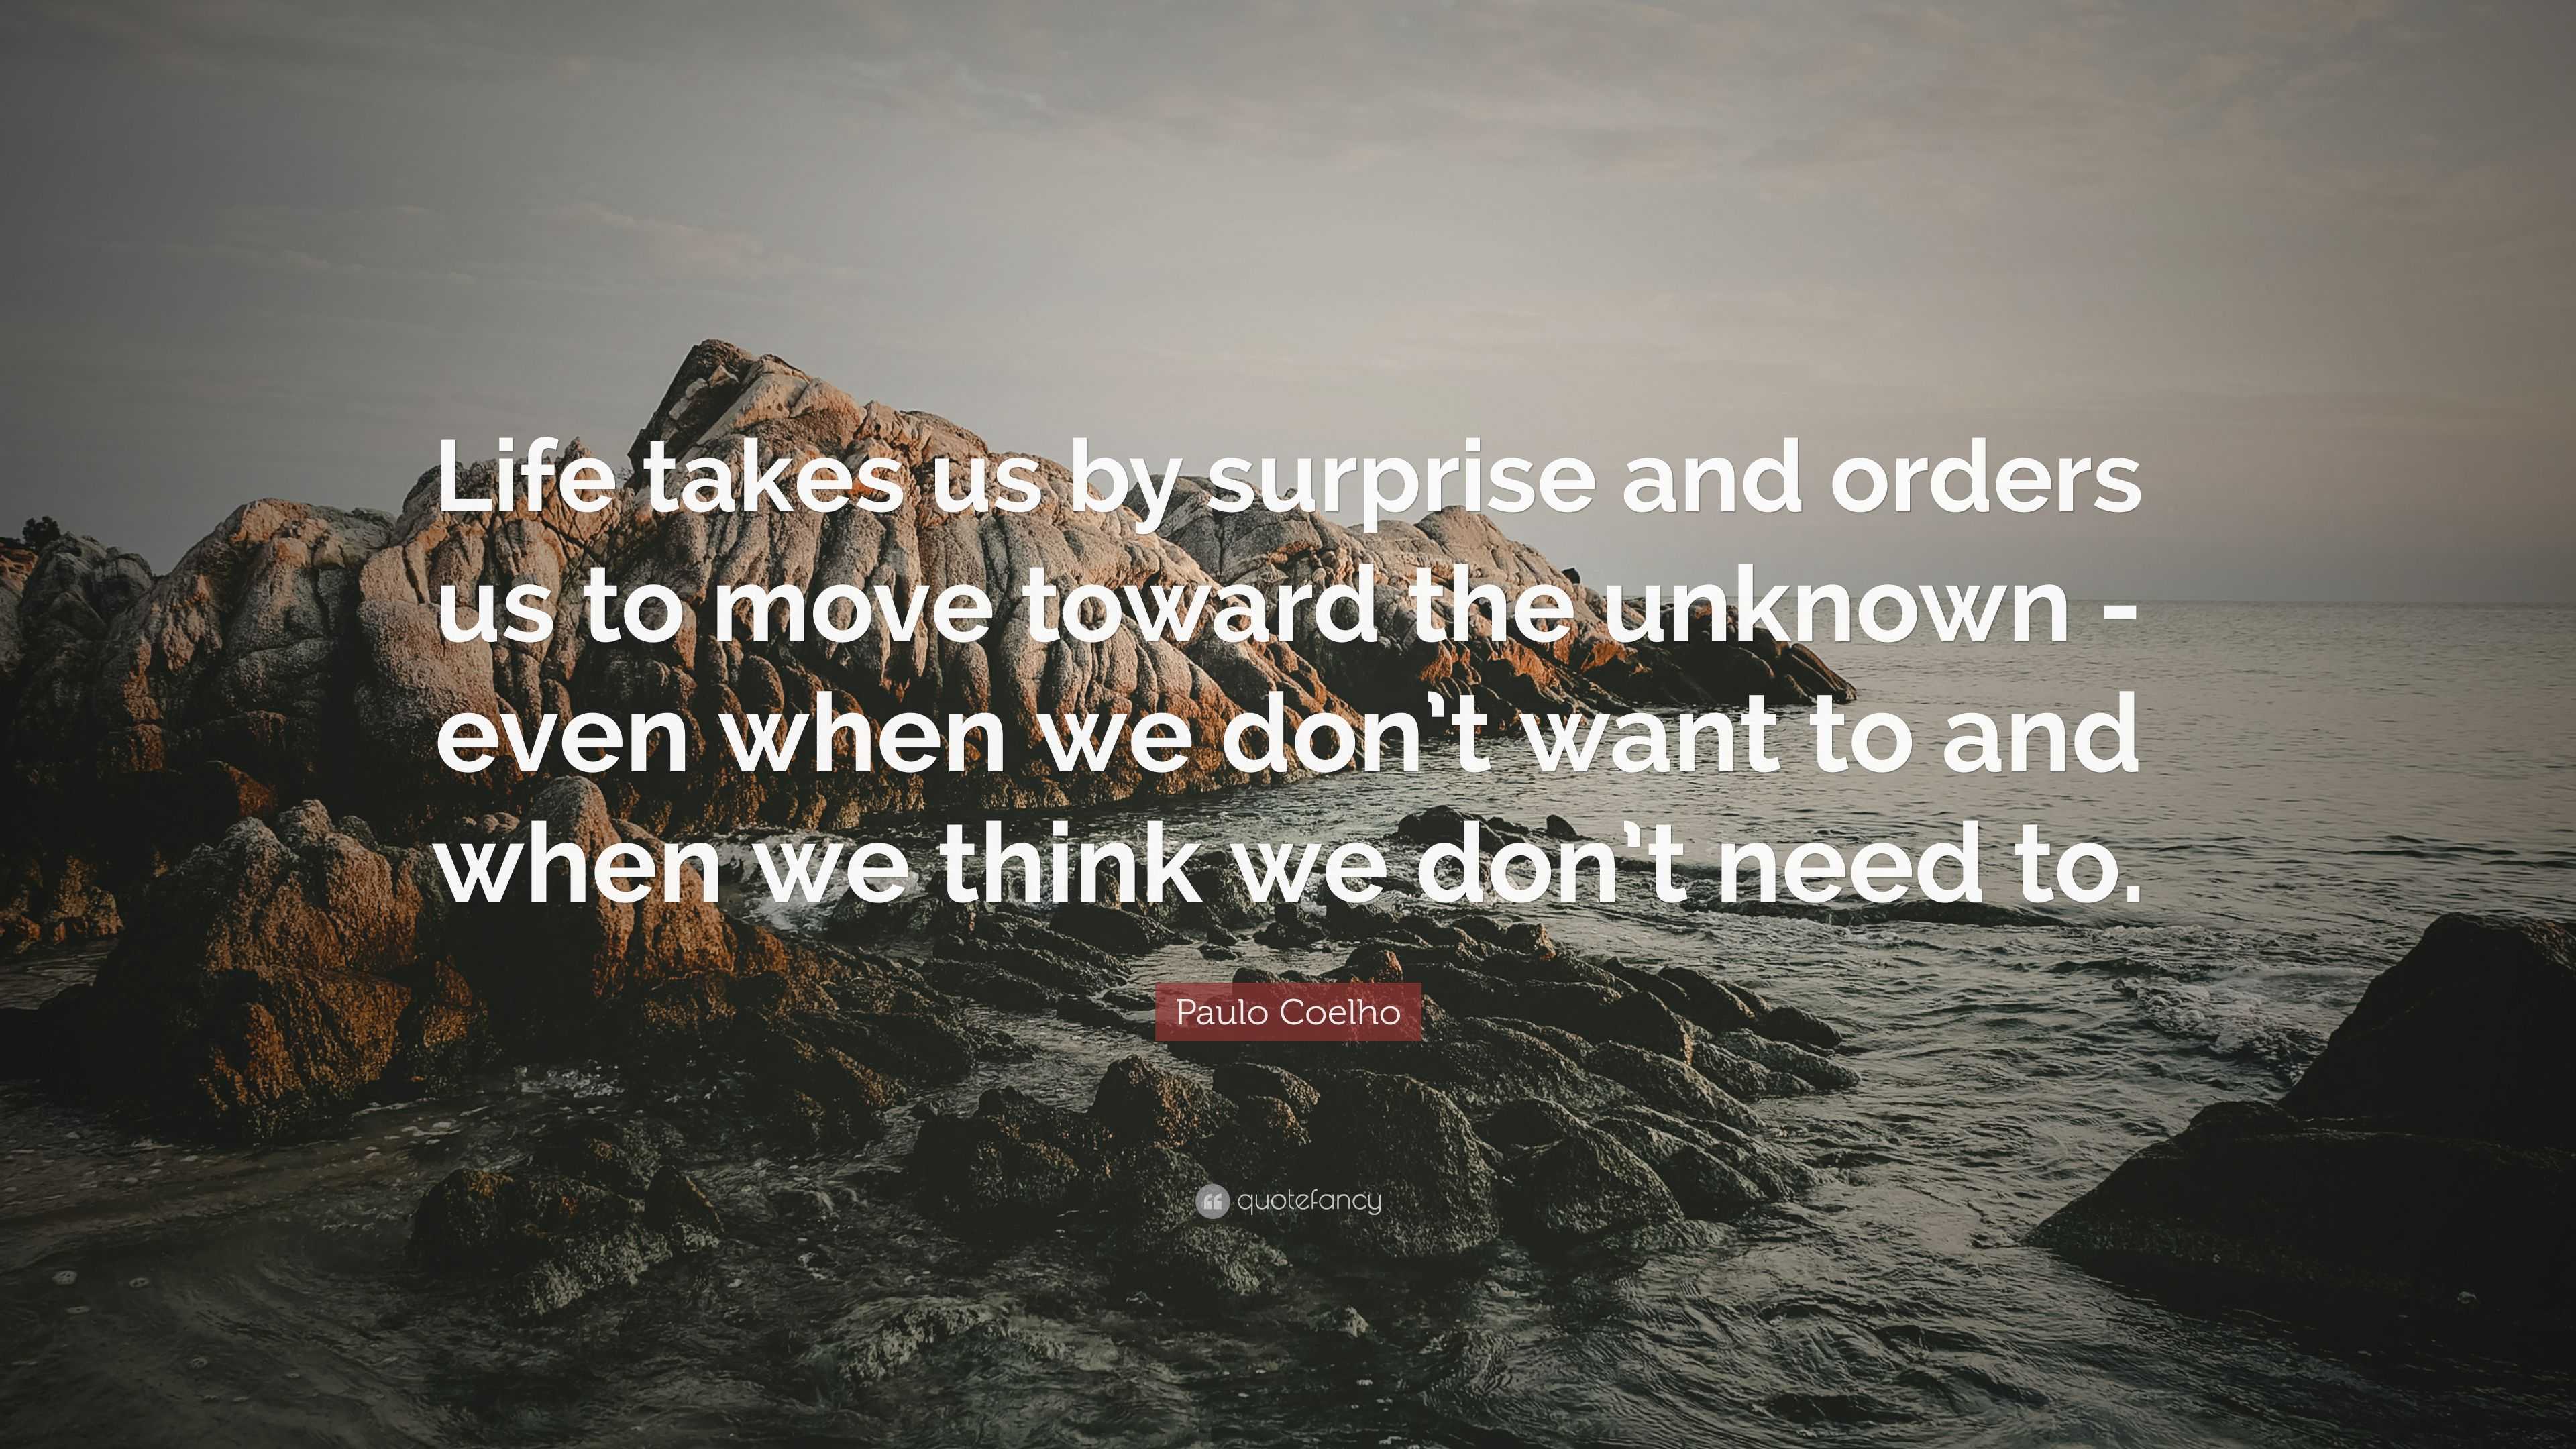 Paulo Coelho Quote: “Life takes us by surprise and orders us to move ...